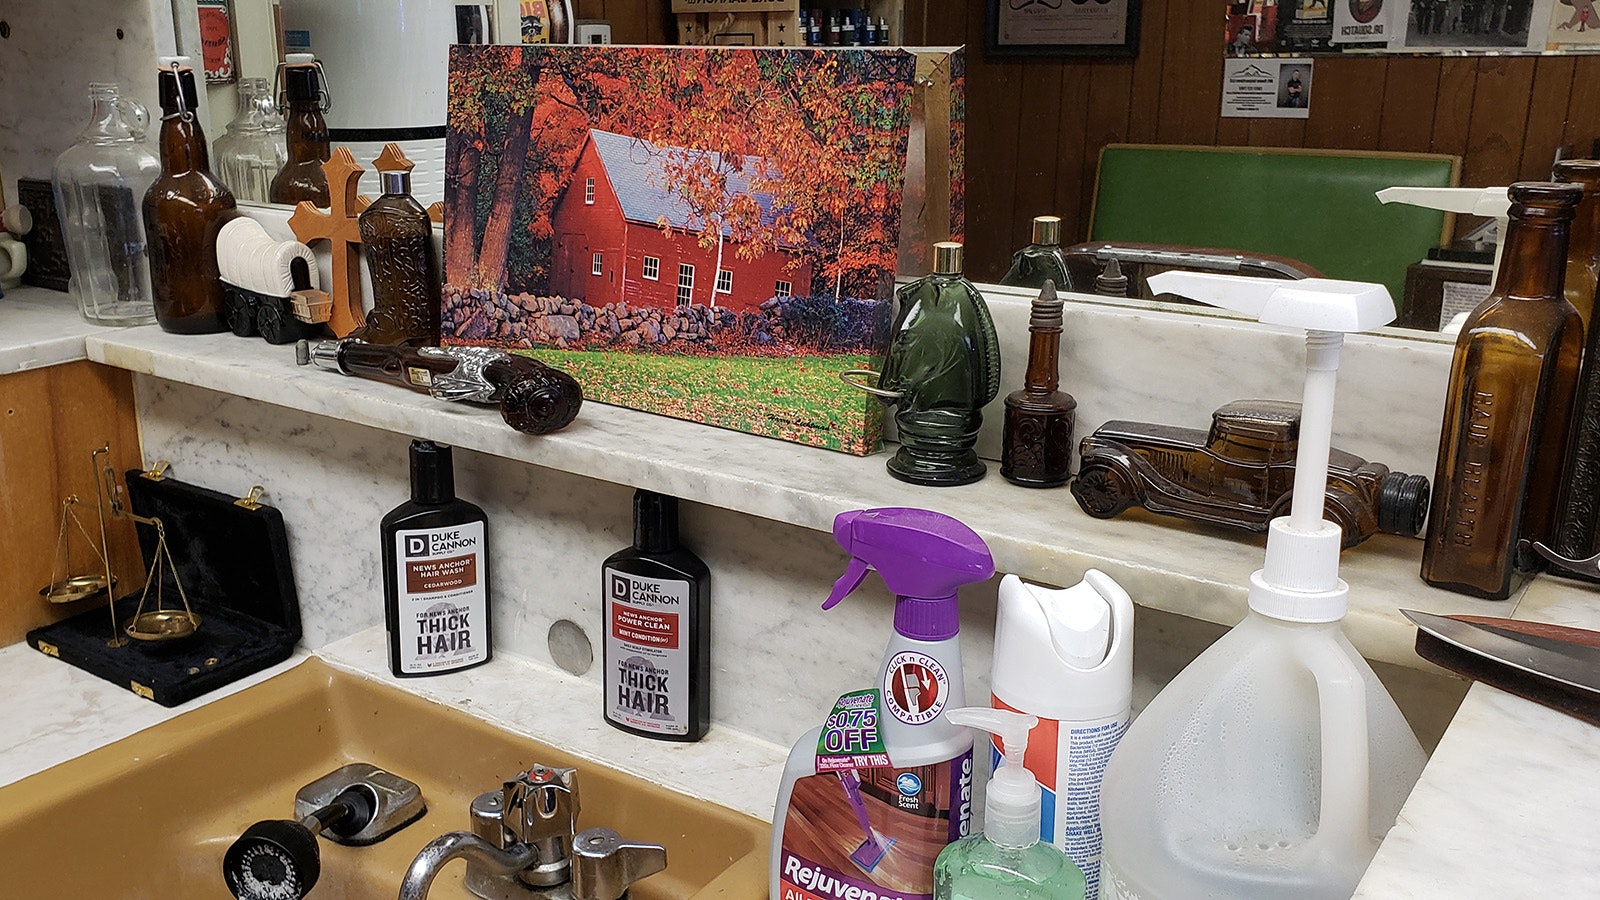 Antique bottles and oil paintings surround the station where Kurt Wheeler washes hair.